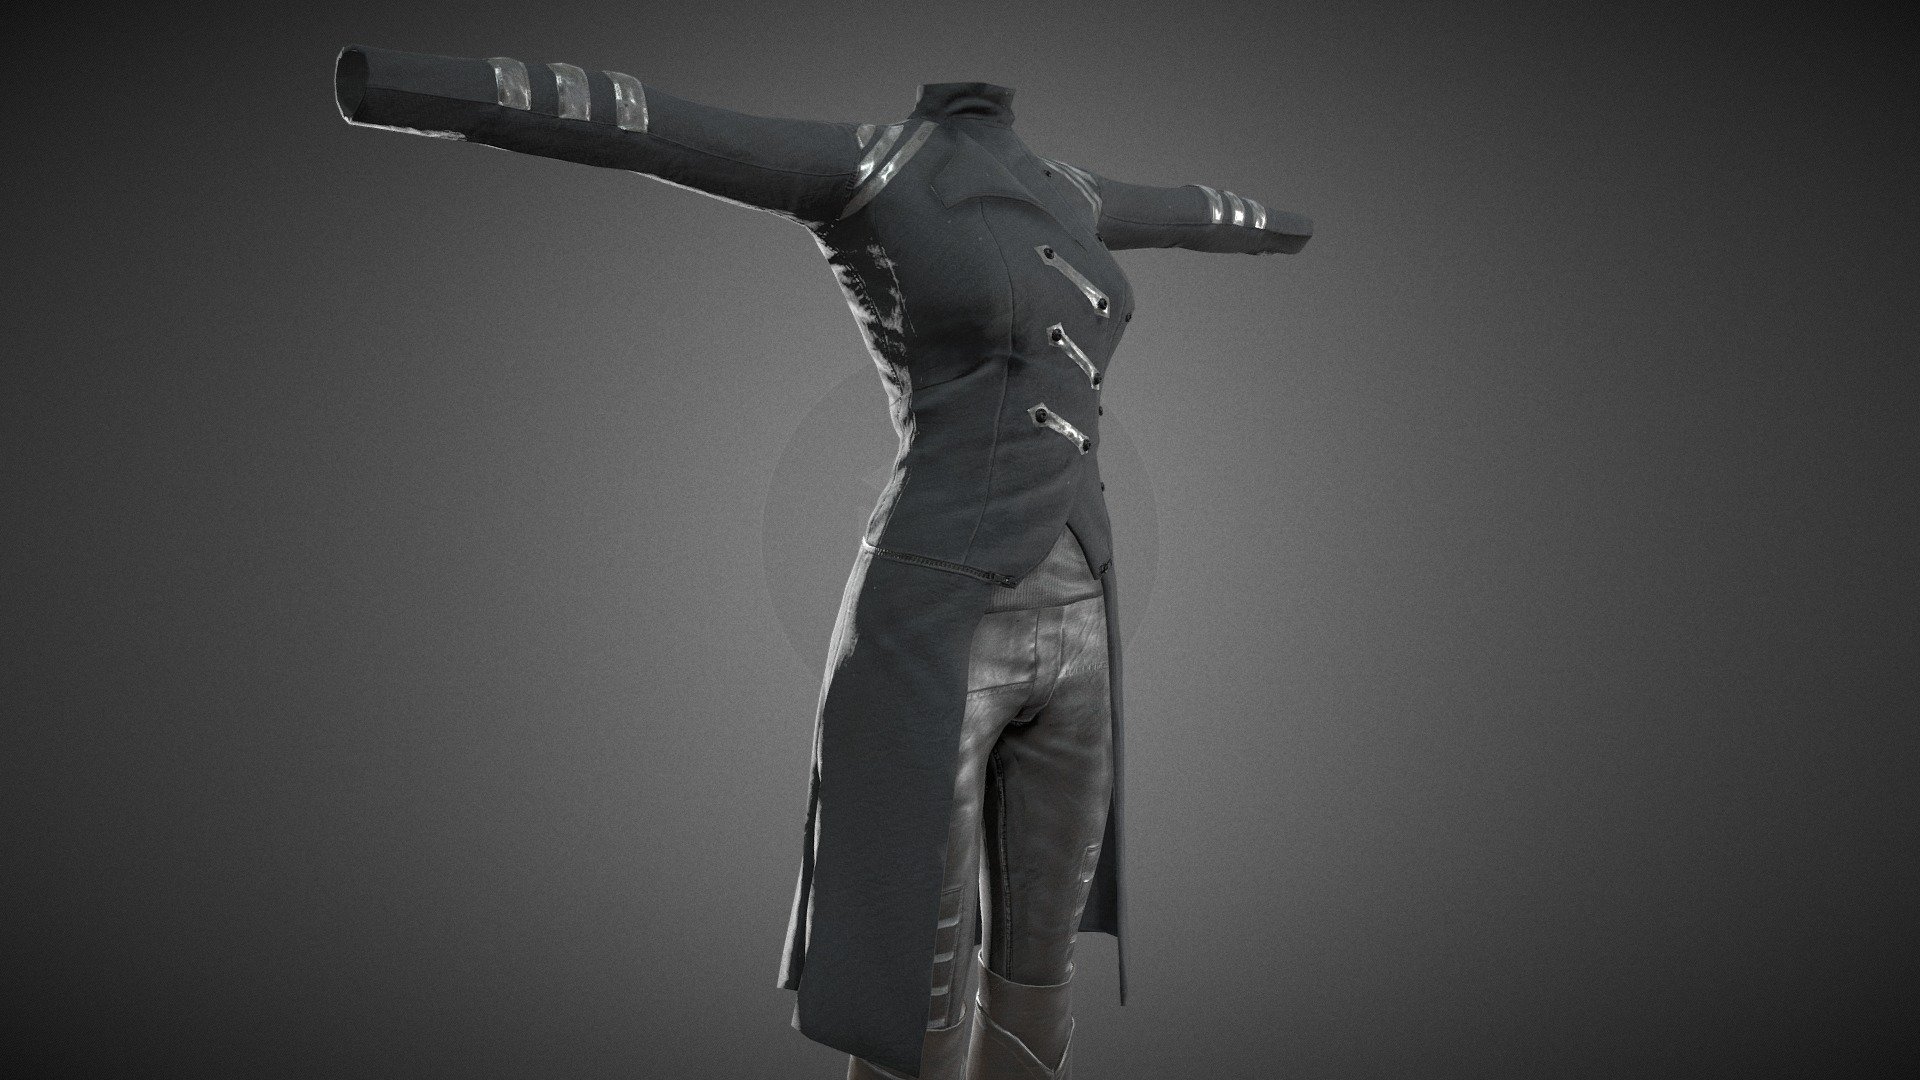 CG StudioX Present :
Female Post Apocalyptic Outfit lowpoly/PBR




This is Female Post Apocalyptic Outfit Comes with Specular and Metalness PBR.

The photo been rendered using Marmoset Toolbag 3 (real time game engine )


Features :



Comes with Specular and Metalness PBR 4K texture .

Good topology.

Low polygon geometry.

The Model is prefect for game for both Specular workflow as in Unity and Metalness as in Unreal engine .

The model also rendered using Marmoset Toolbag 3 with both Specular and Metalness PBR and also included in the product with the full texture.

The product has ID map in every part for changing any part in the model .

The texture can be easily adjustable .


Texture :



ALL Texture [Albedo -Normal-Metalness -Roughness-Gloss-Specular-ID-AO] (4096*4096)

Four objects (Top-Pants-Boots-Shirt) each one has it own UV set and textures.


Files :
Marmoset Toolbag 3 ,Maya,,FBX,OBj with all the textures.




Contact me for if you have any questions.
 - Female Post Apocalyptic Outfit - Buy Royalty Free 3D model by CG StudioX (@CG_StudioX) 3d model